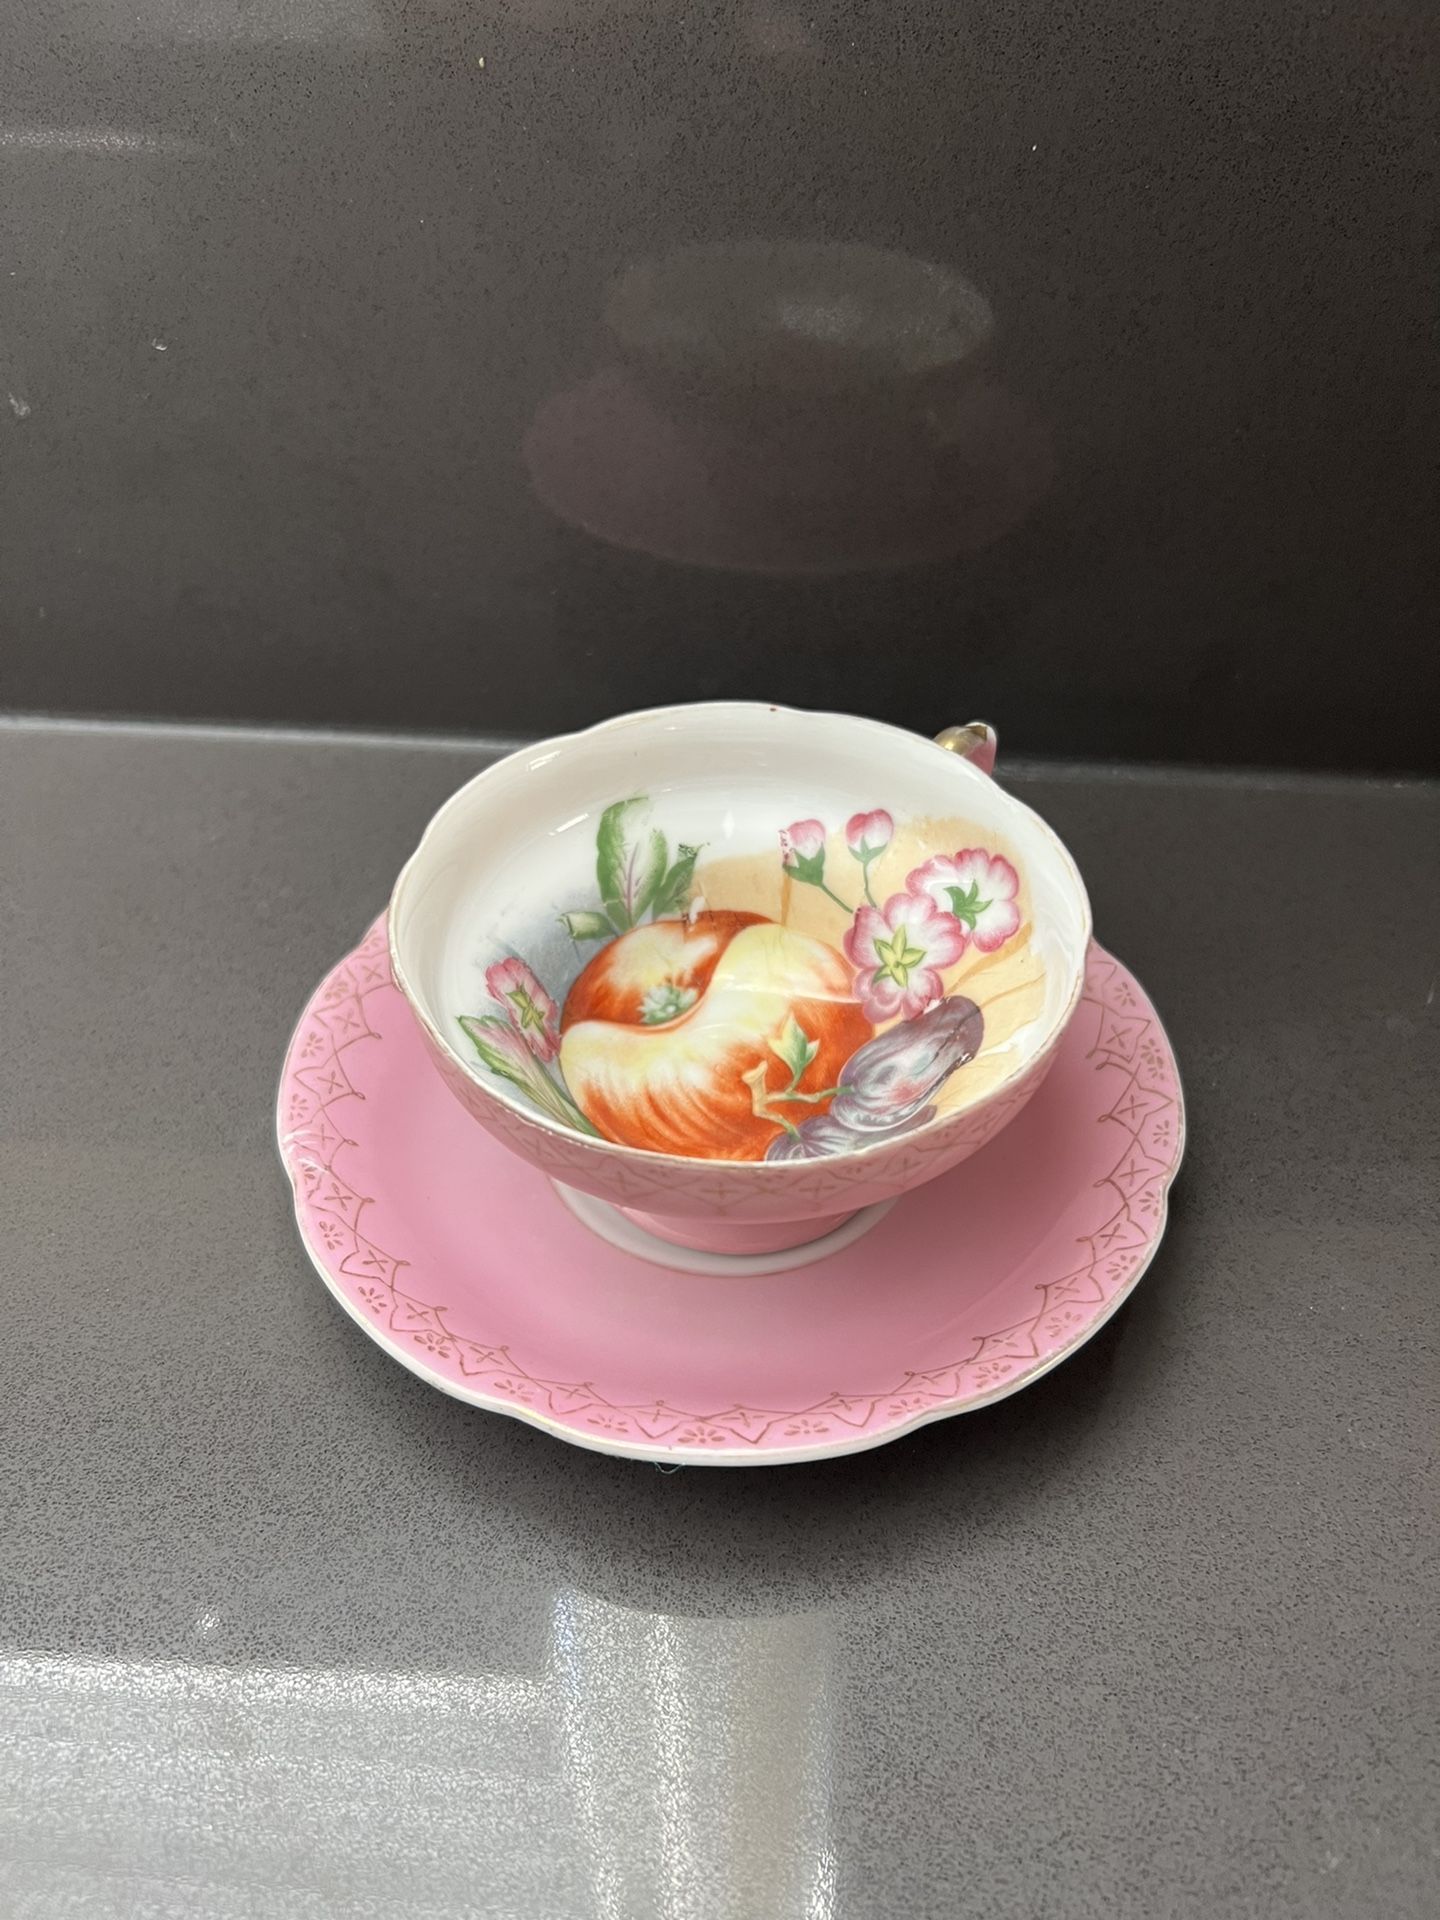 Antique Cup & Saucer Fruit Royal Sealy China Japan, No Chips or cracks